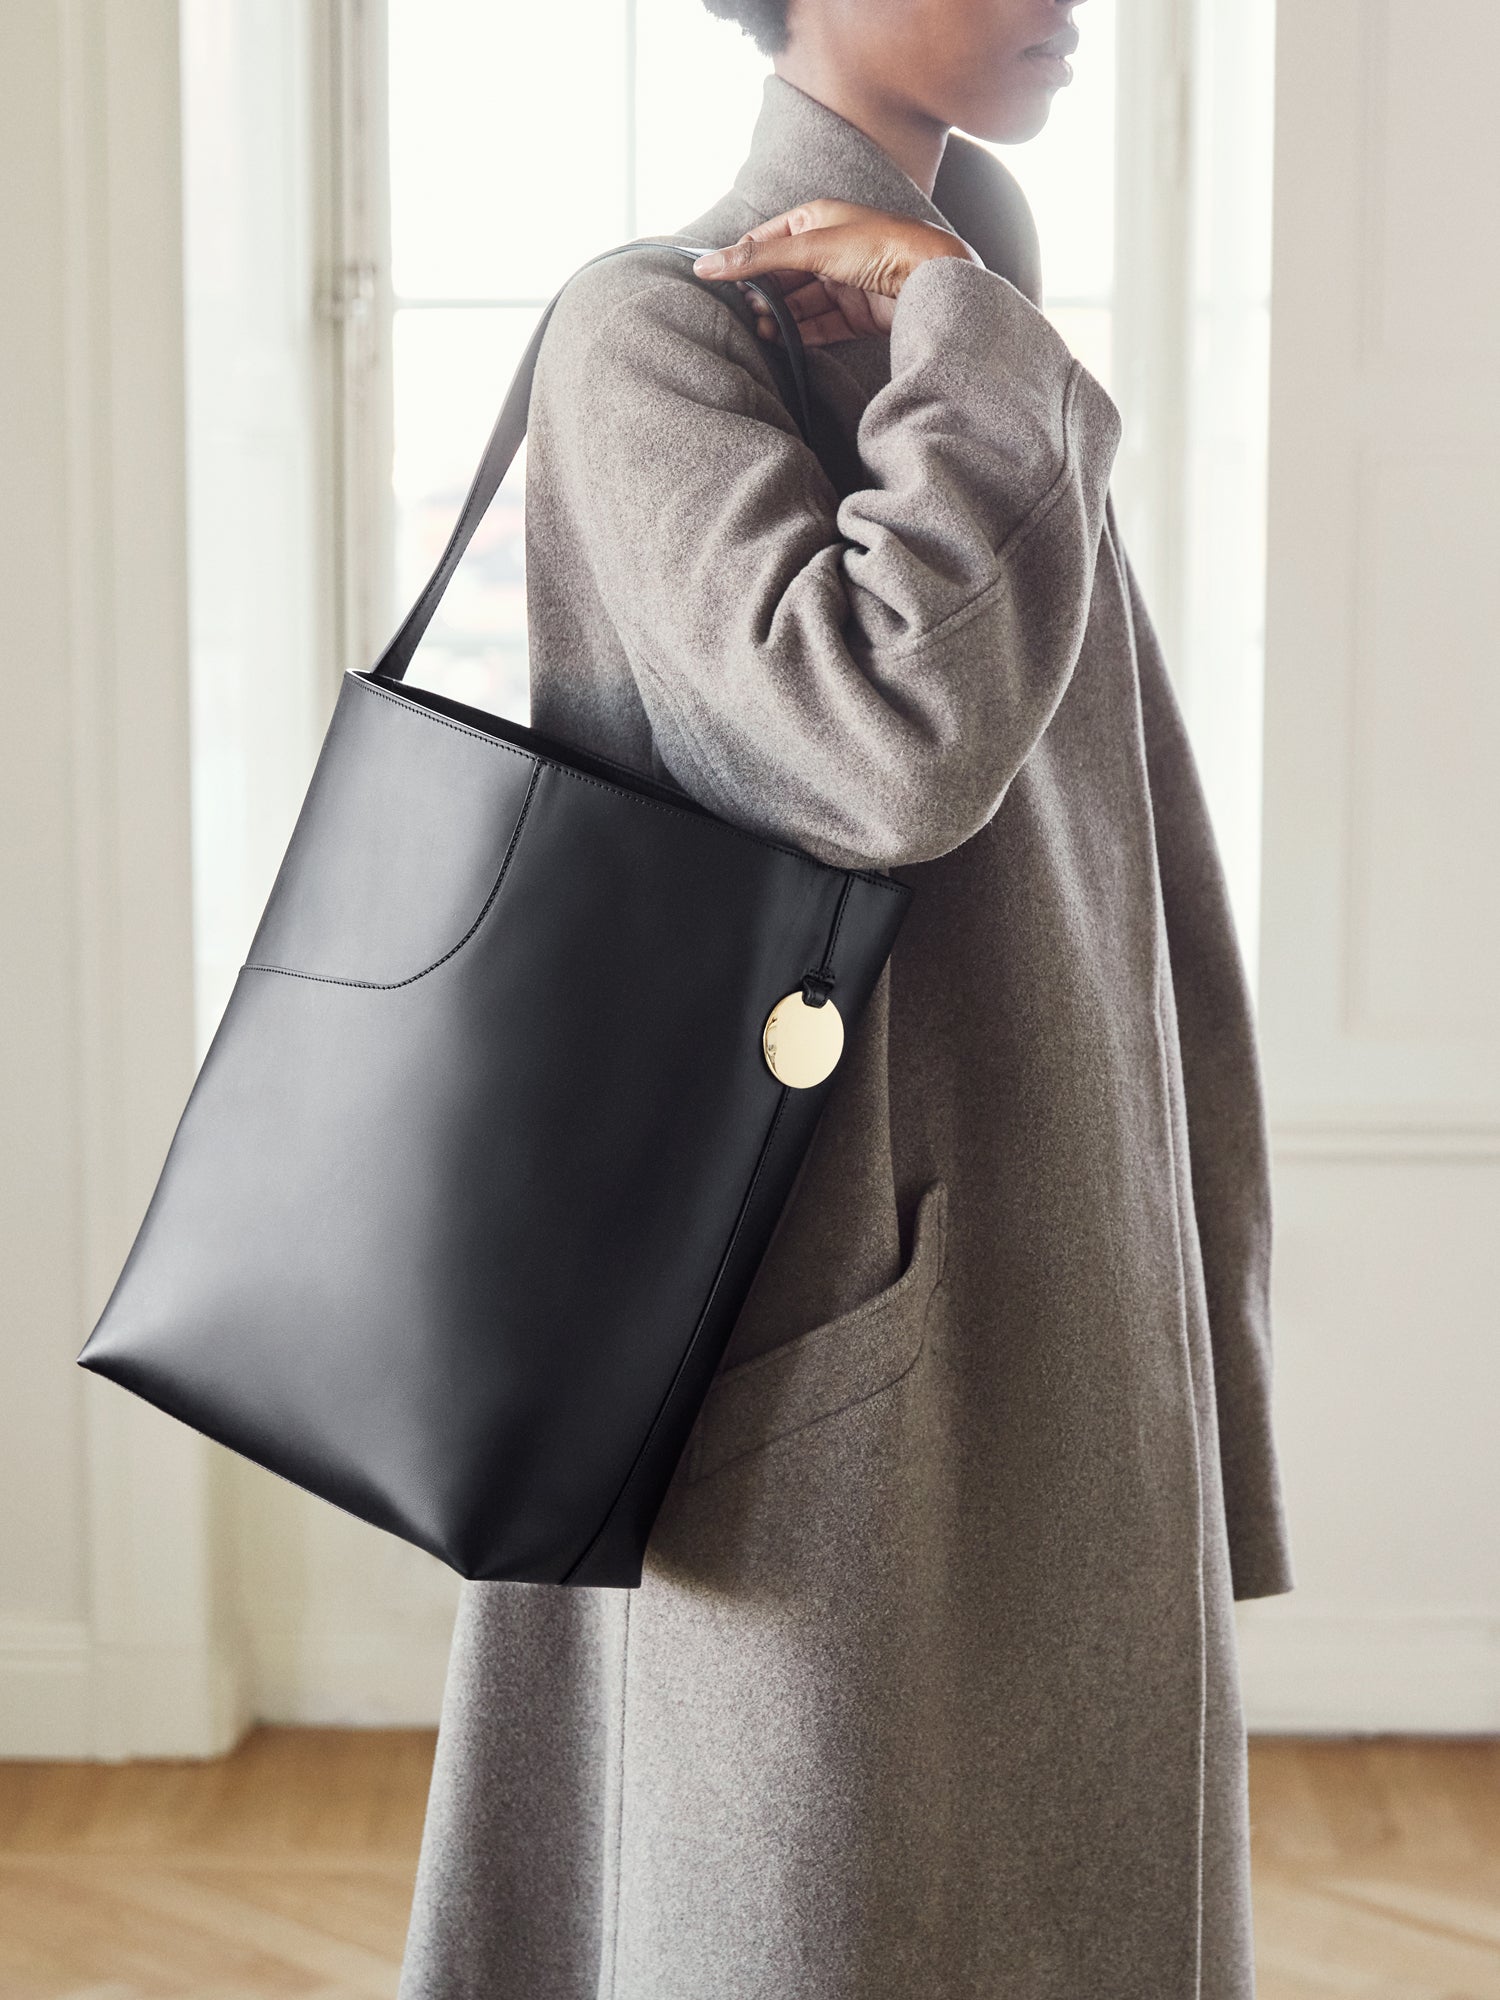 Best black leather tote bags from Mulberry, Zara and more | Evening Standard